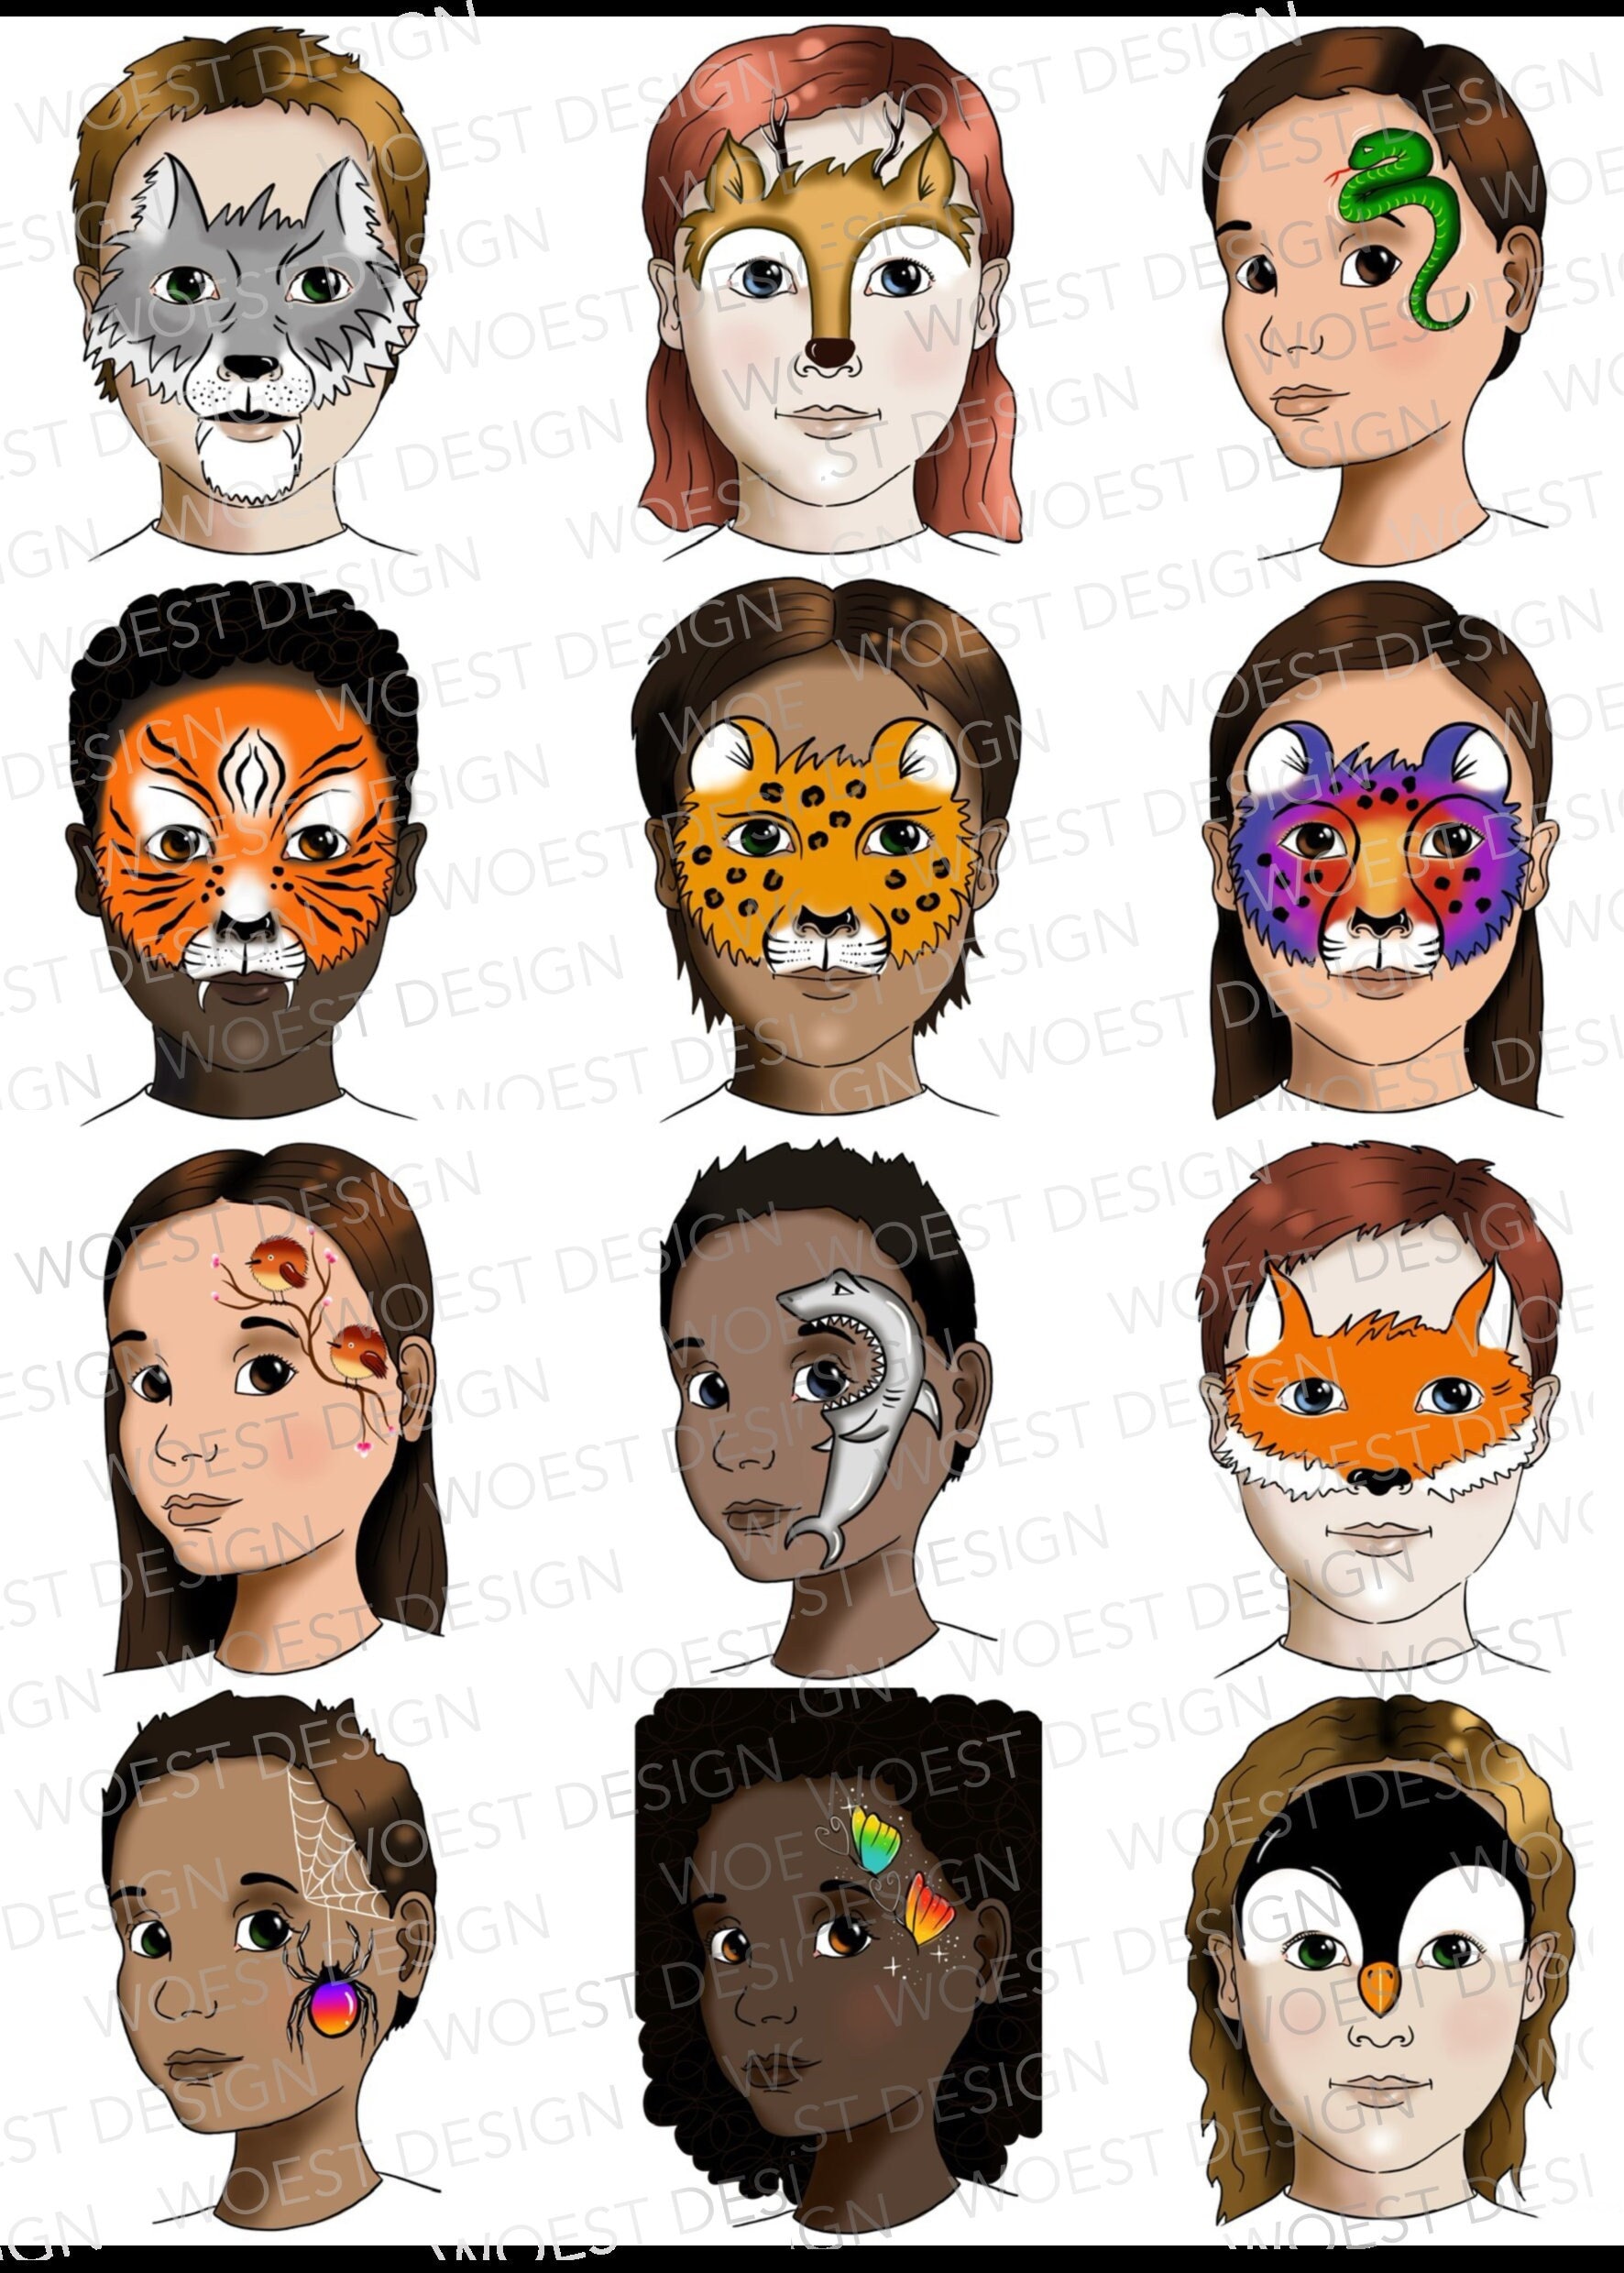  Sparkling Faces Face Painting Practice Guide - Scary